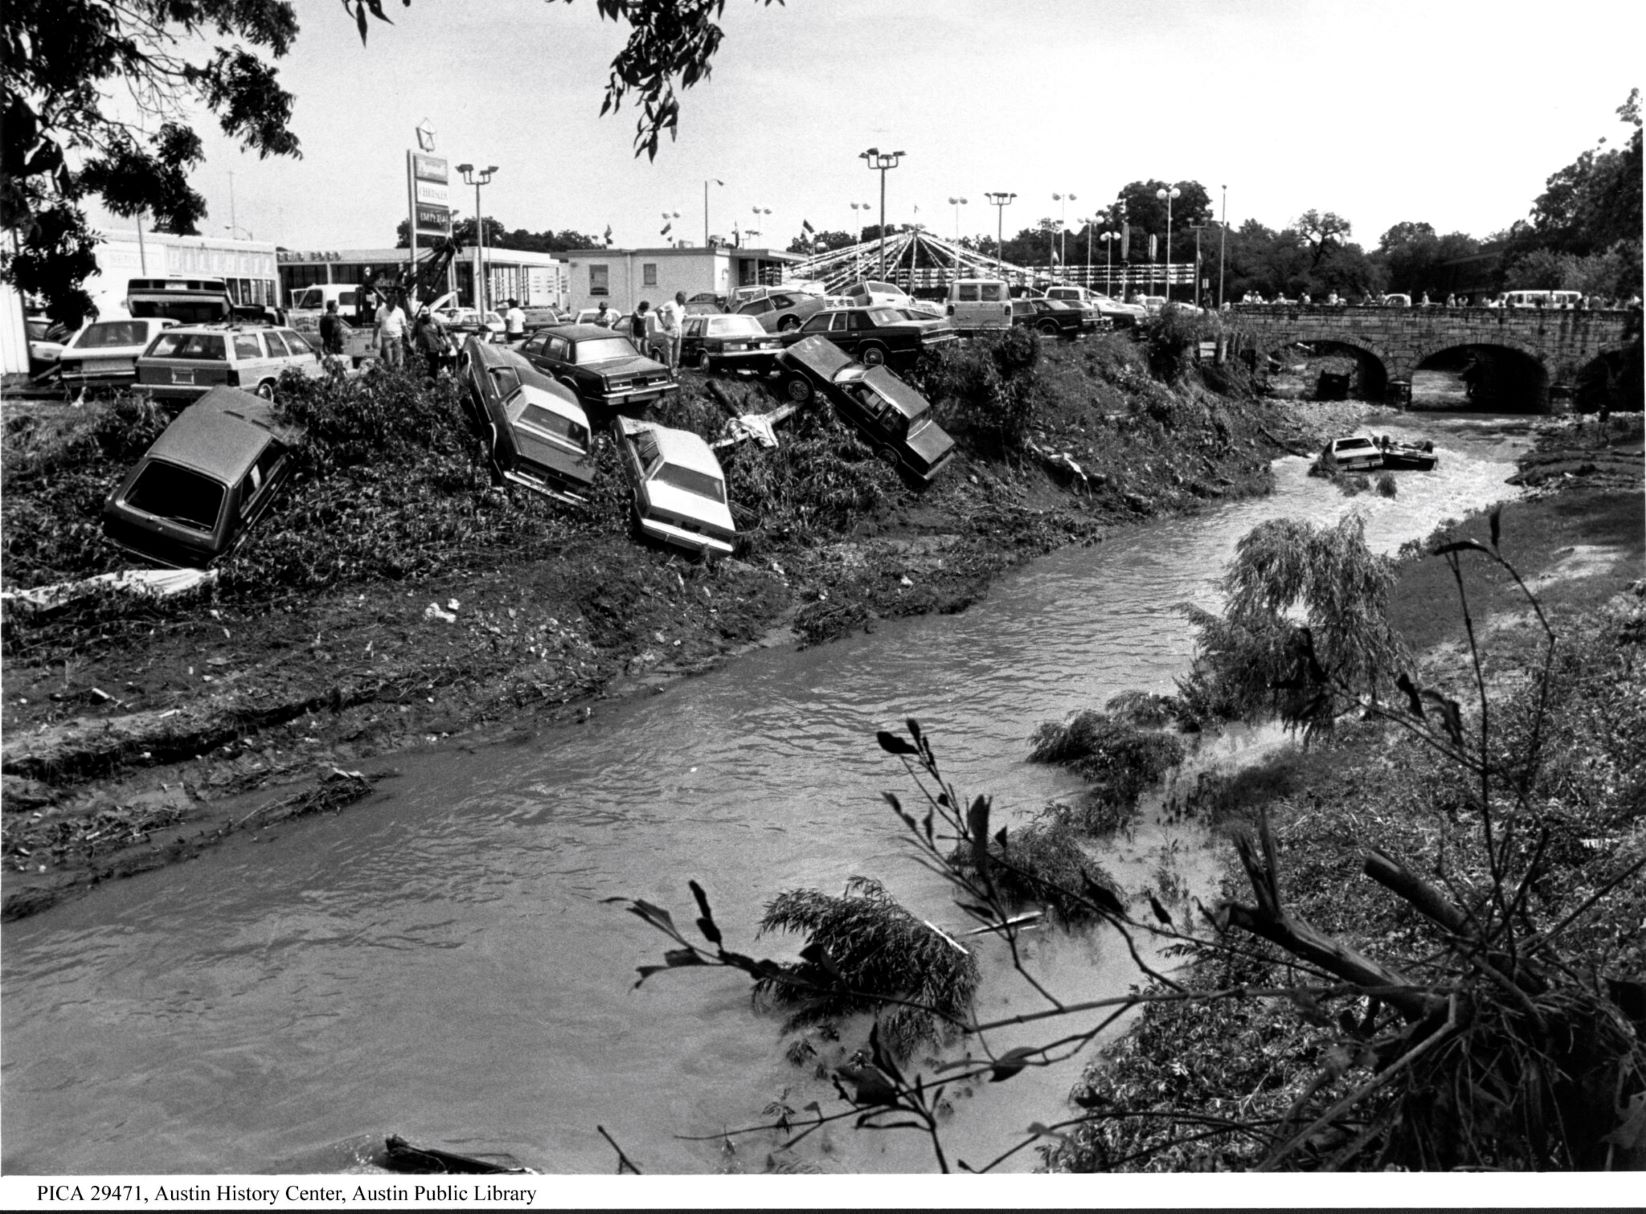 Photo of cars washed into Shoal Creek. Austin History Center PICA 29471.